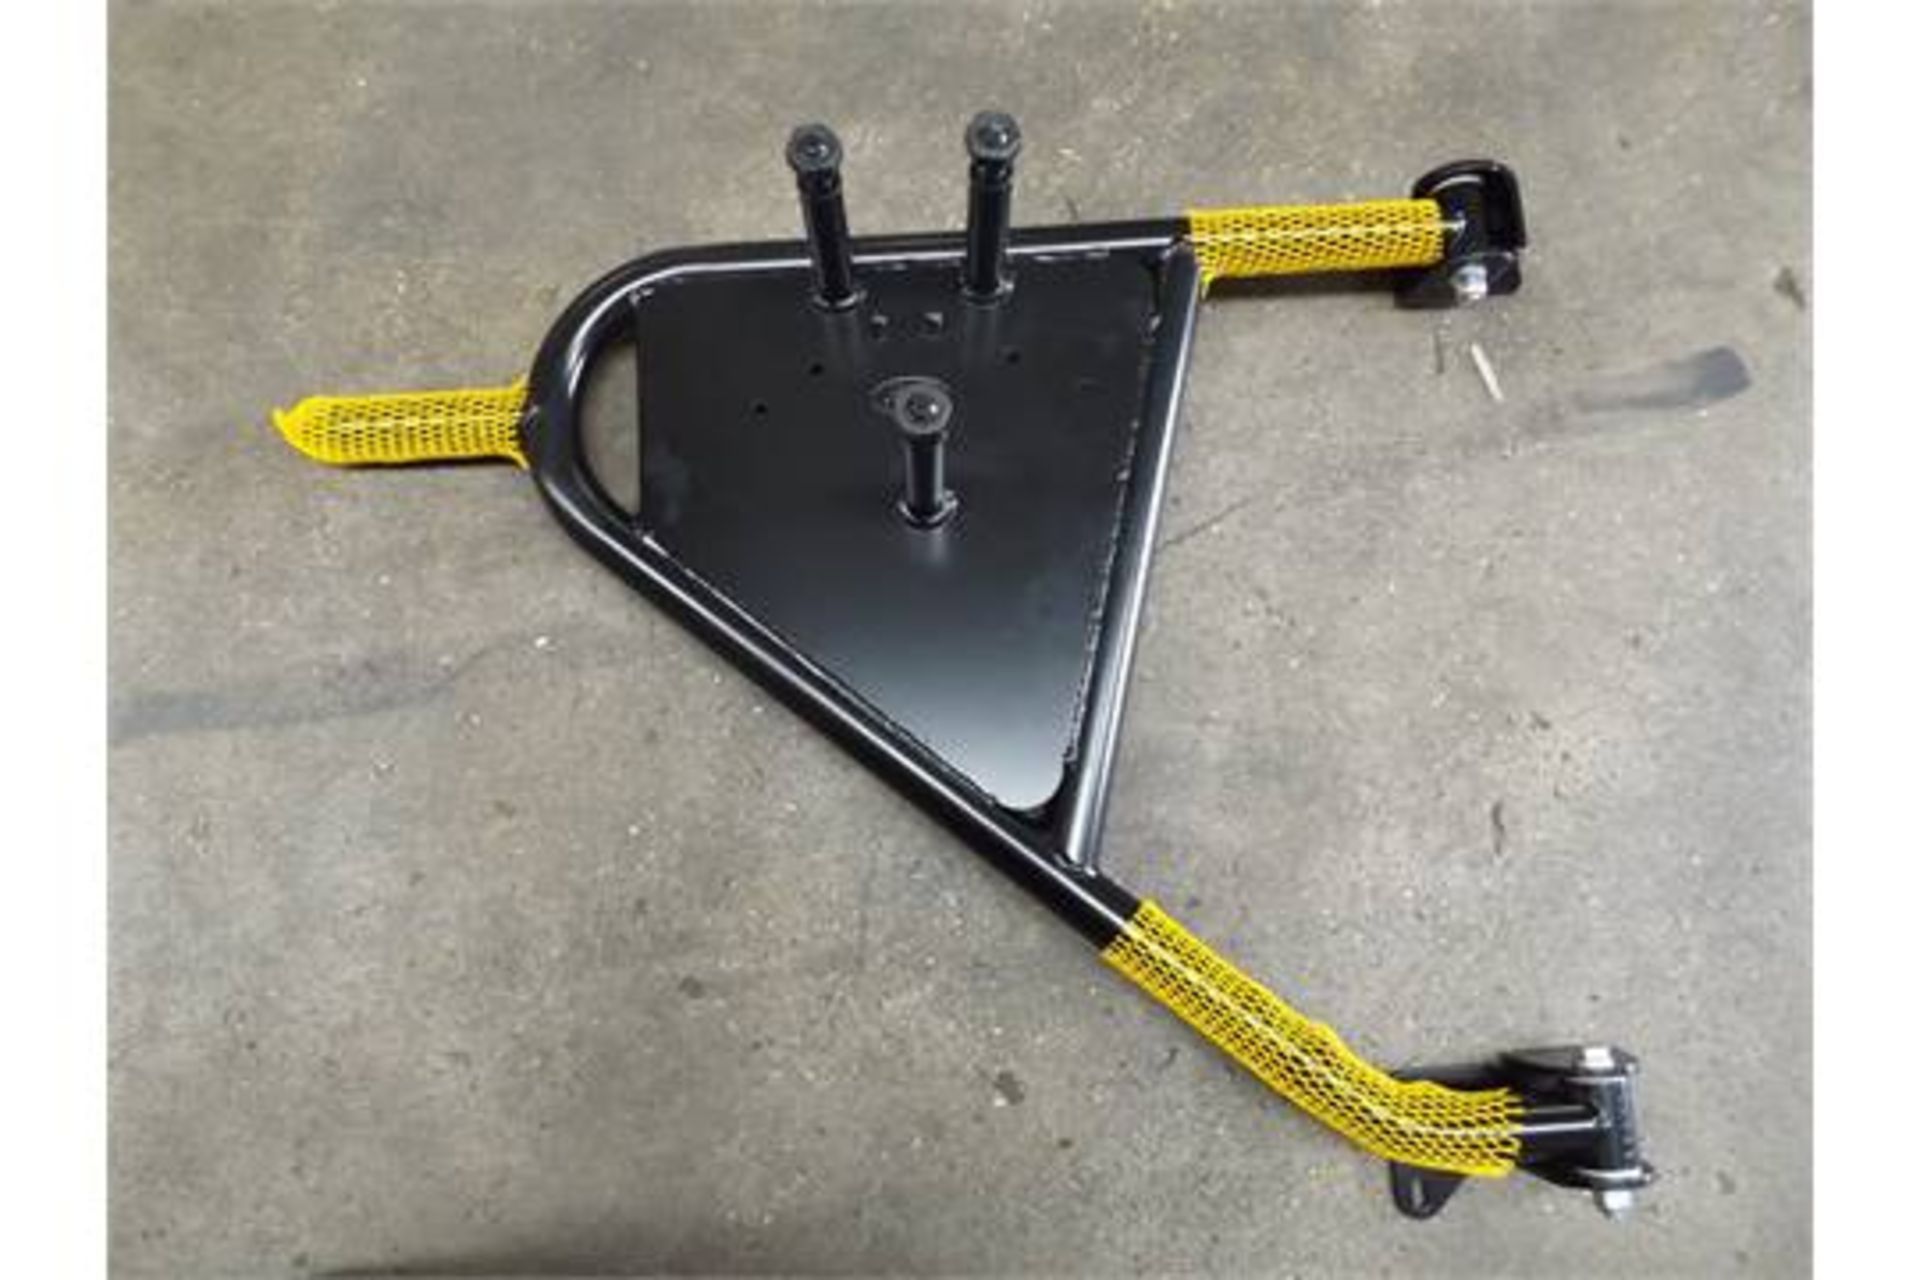 10 x Land Rover Defender Swing Out Spare Wheel Carrier Kits P/No VPLDR0129 - Image 3 of 11